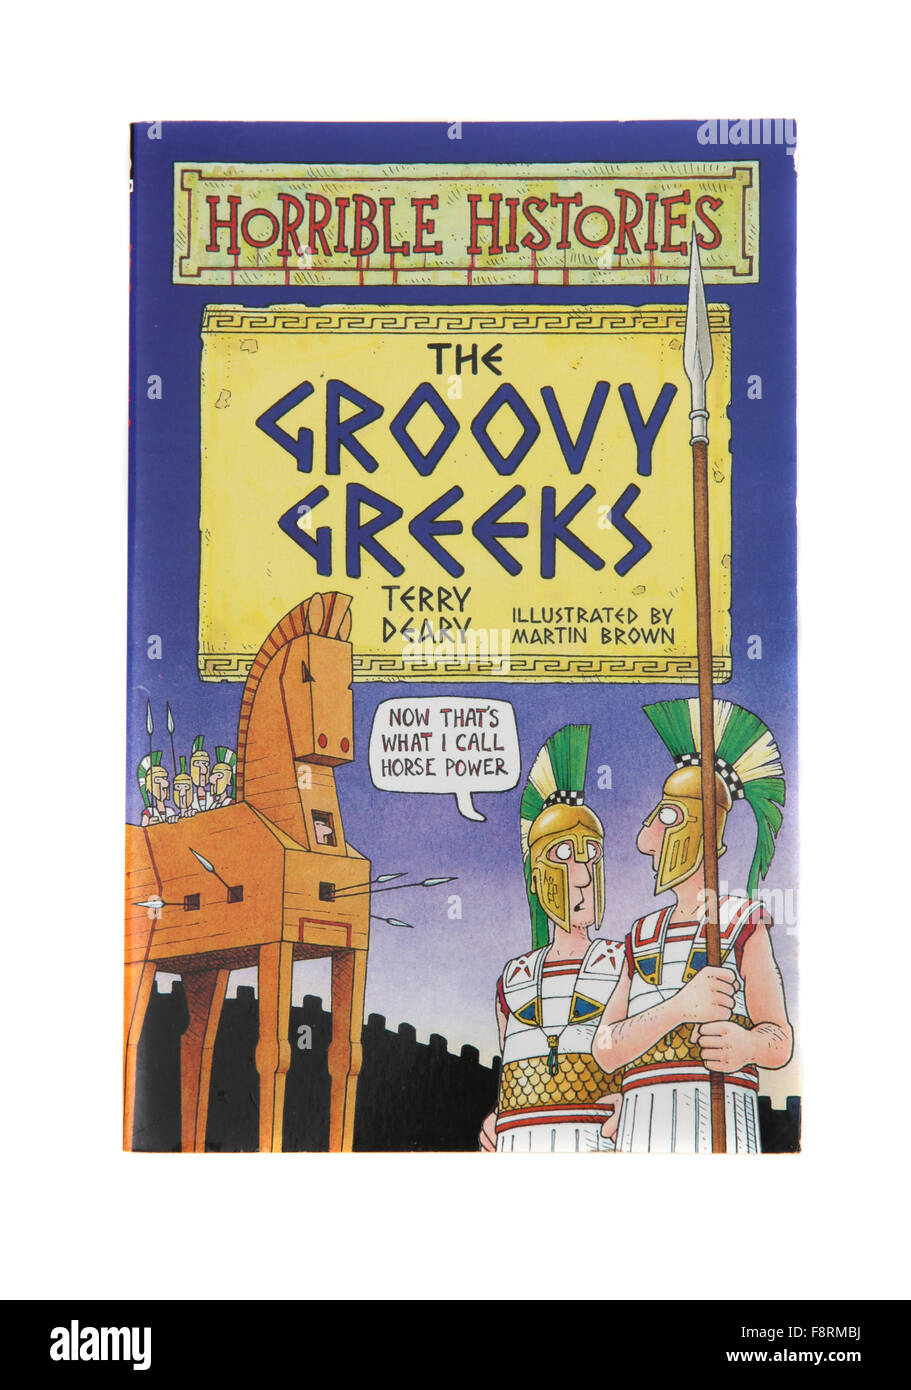 The book The Groovy Greeks from the Horrible Histories series by Terry Deary. Stock Photo